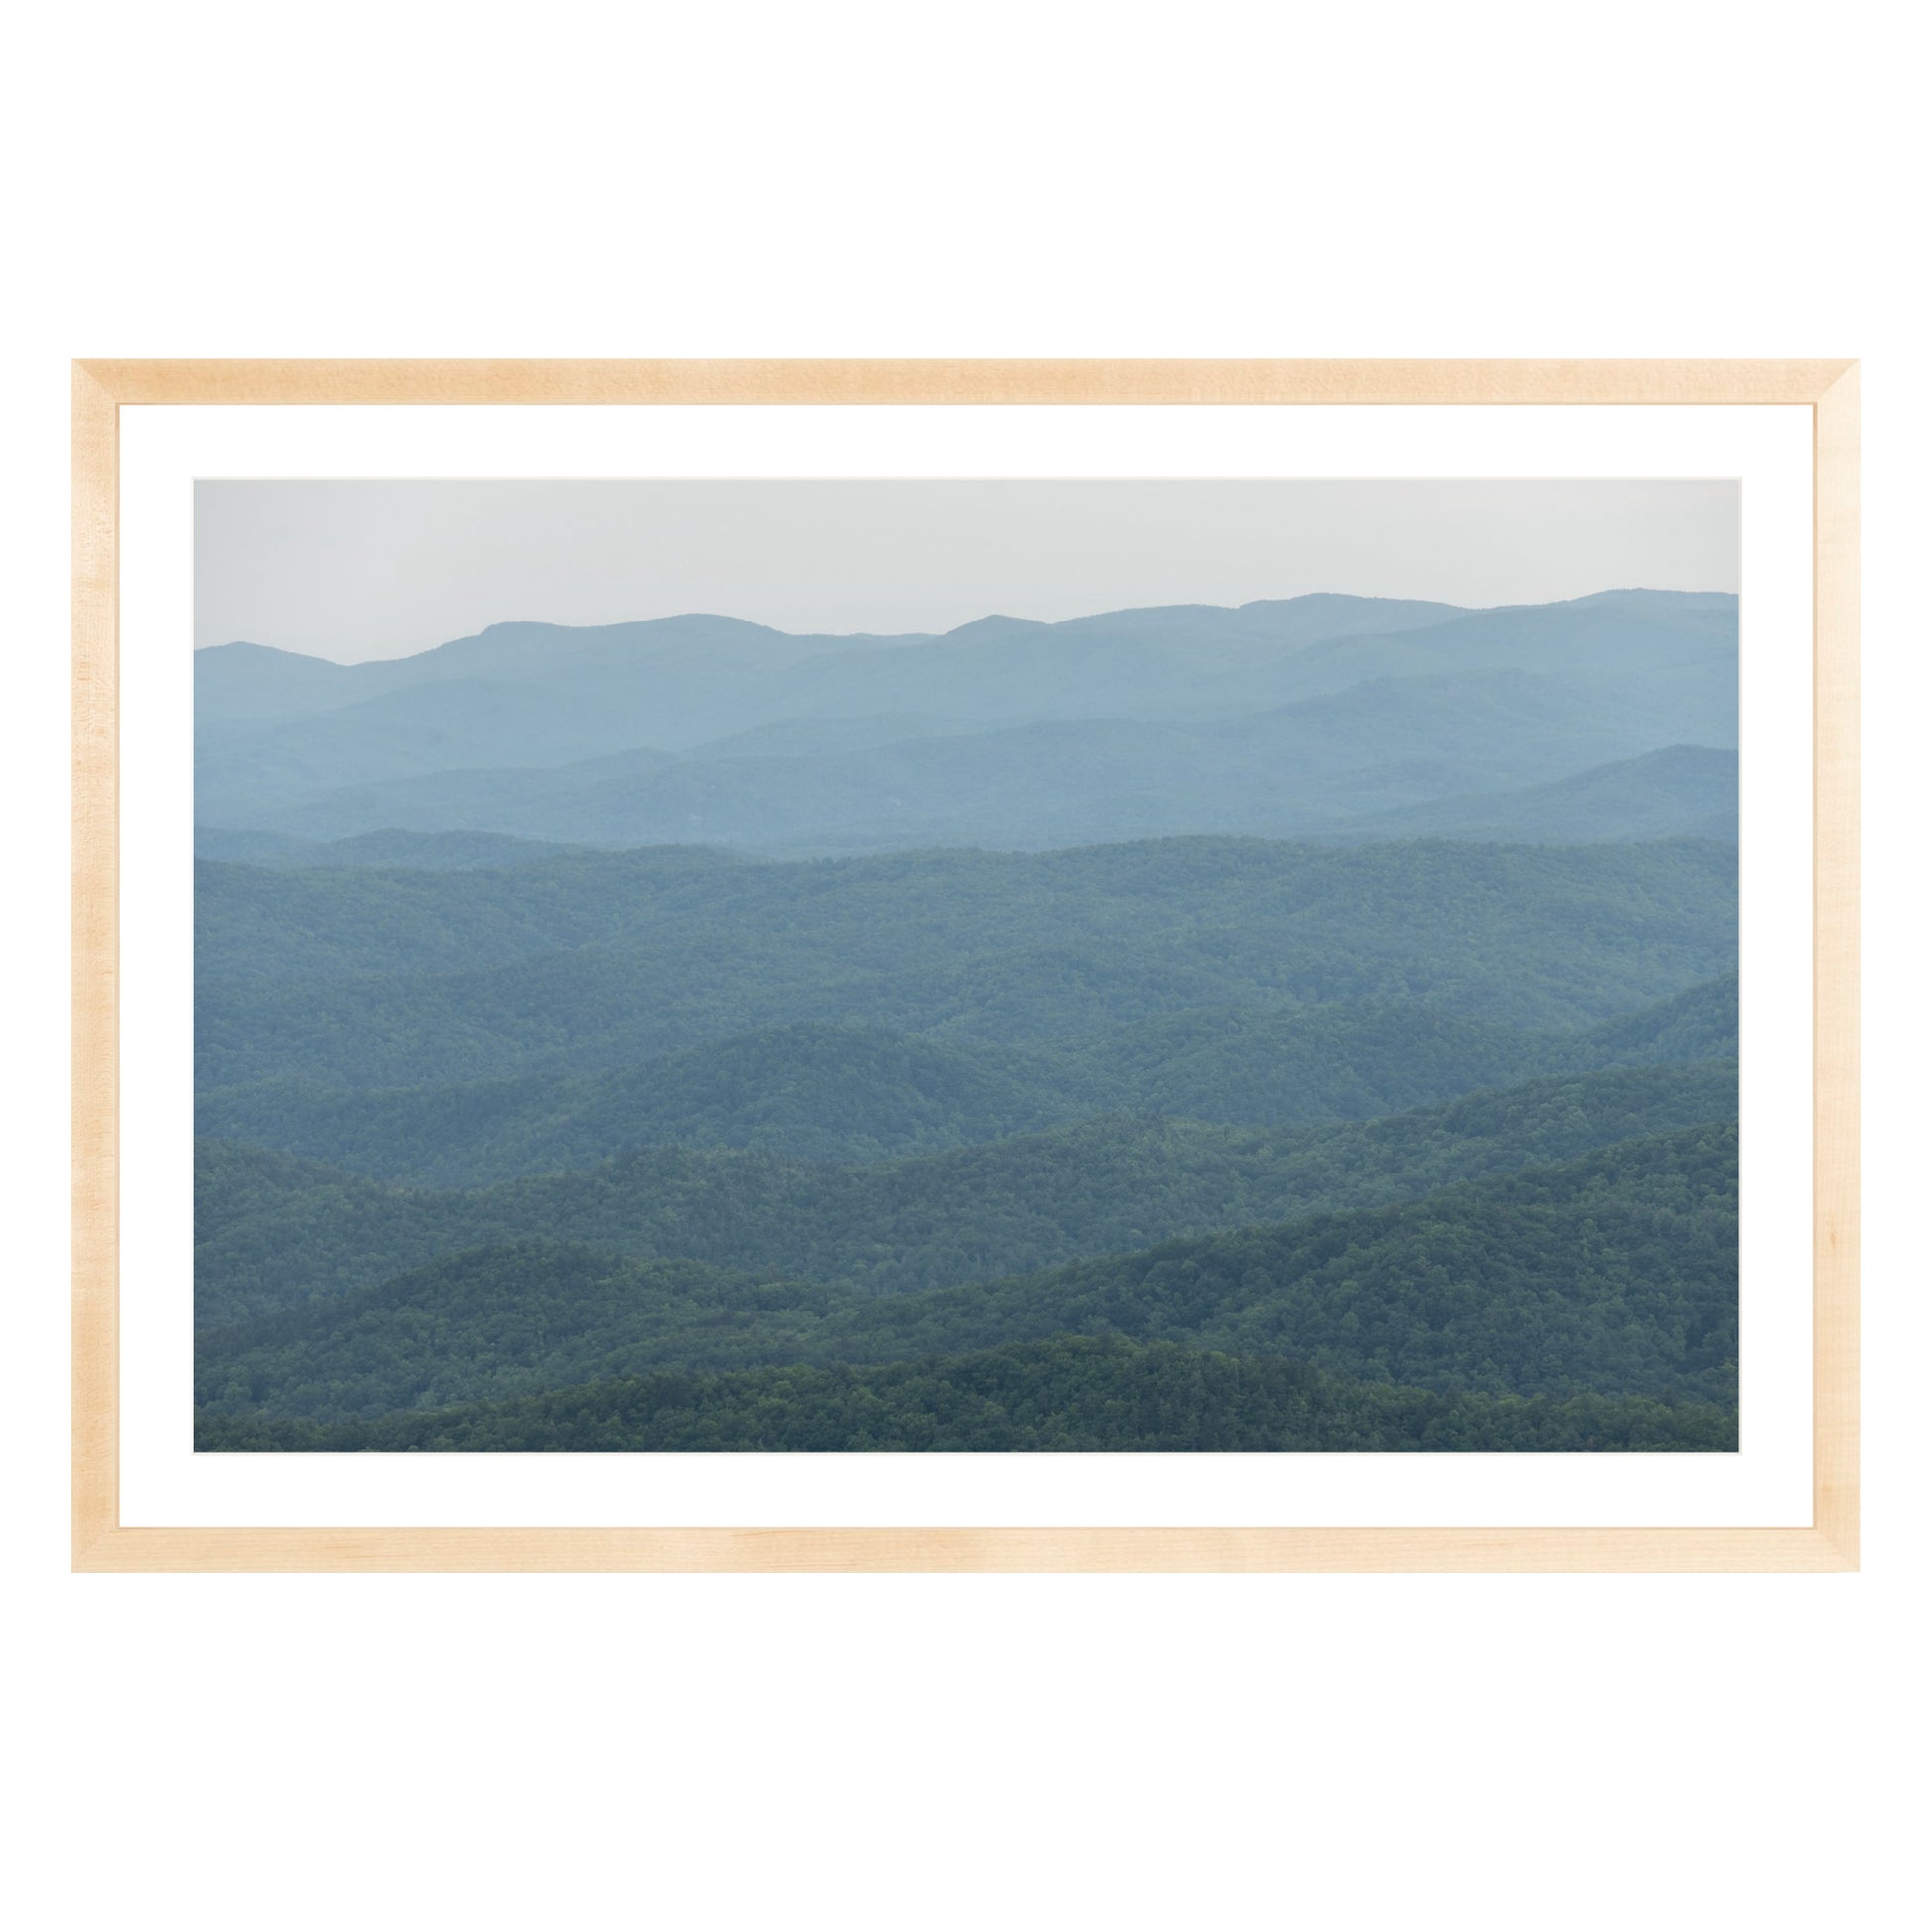 Photograph of mountains in North Carolina framed in natural wood with white mat